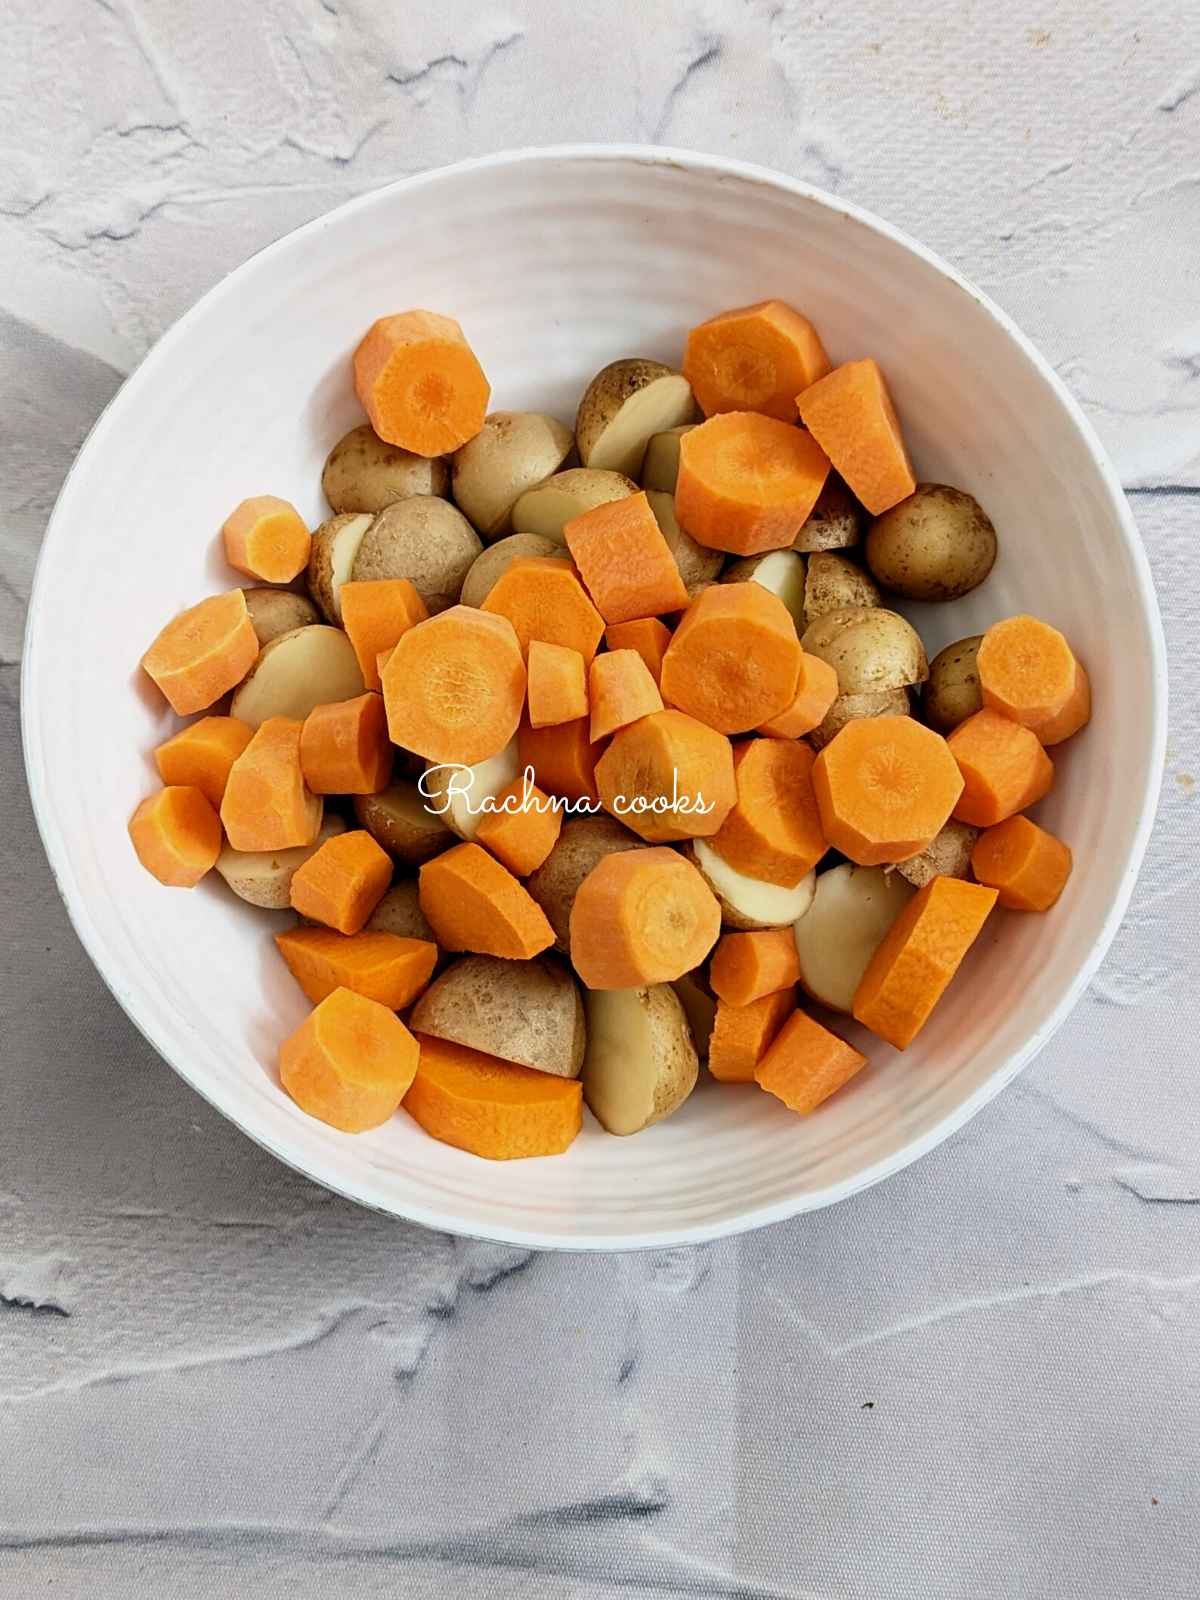 Chopped carrots and potatoes in a bowl